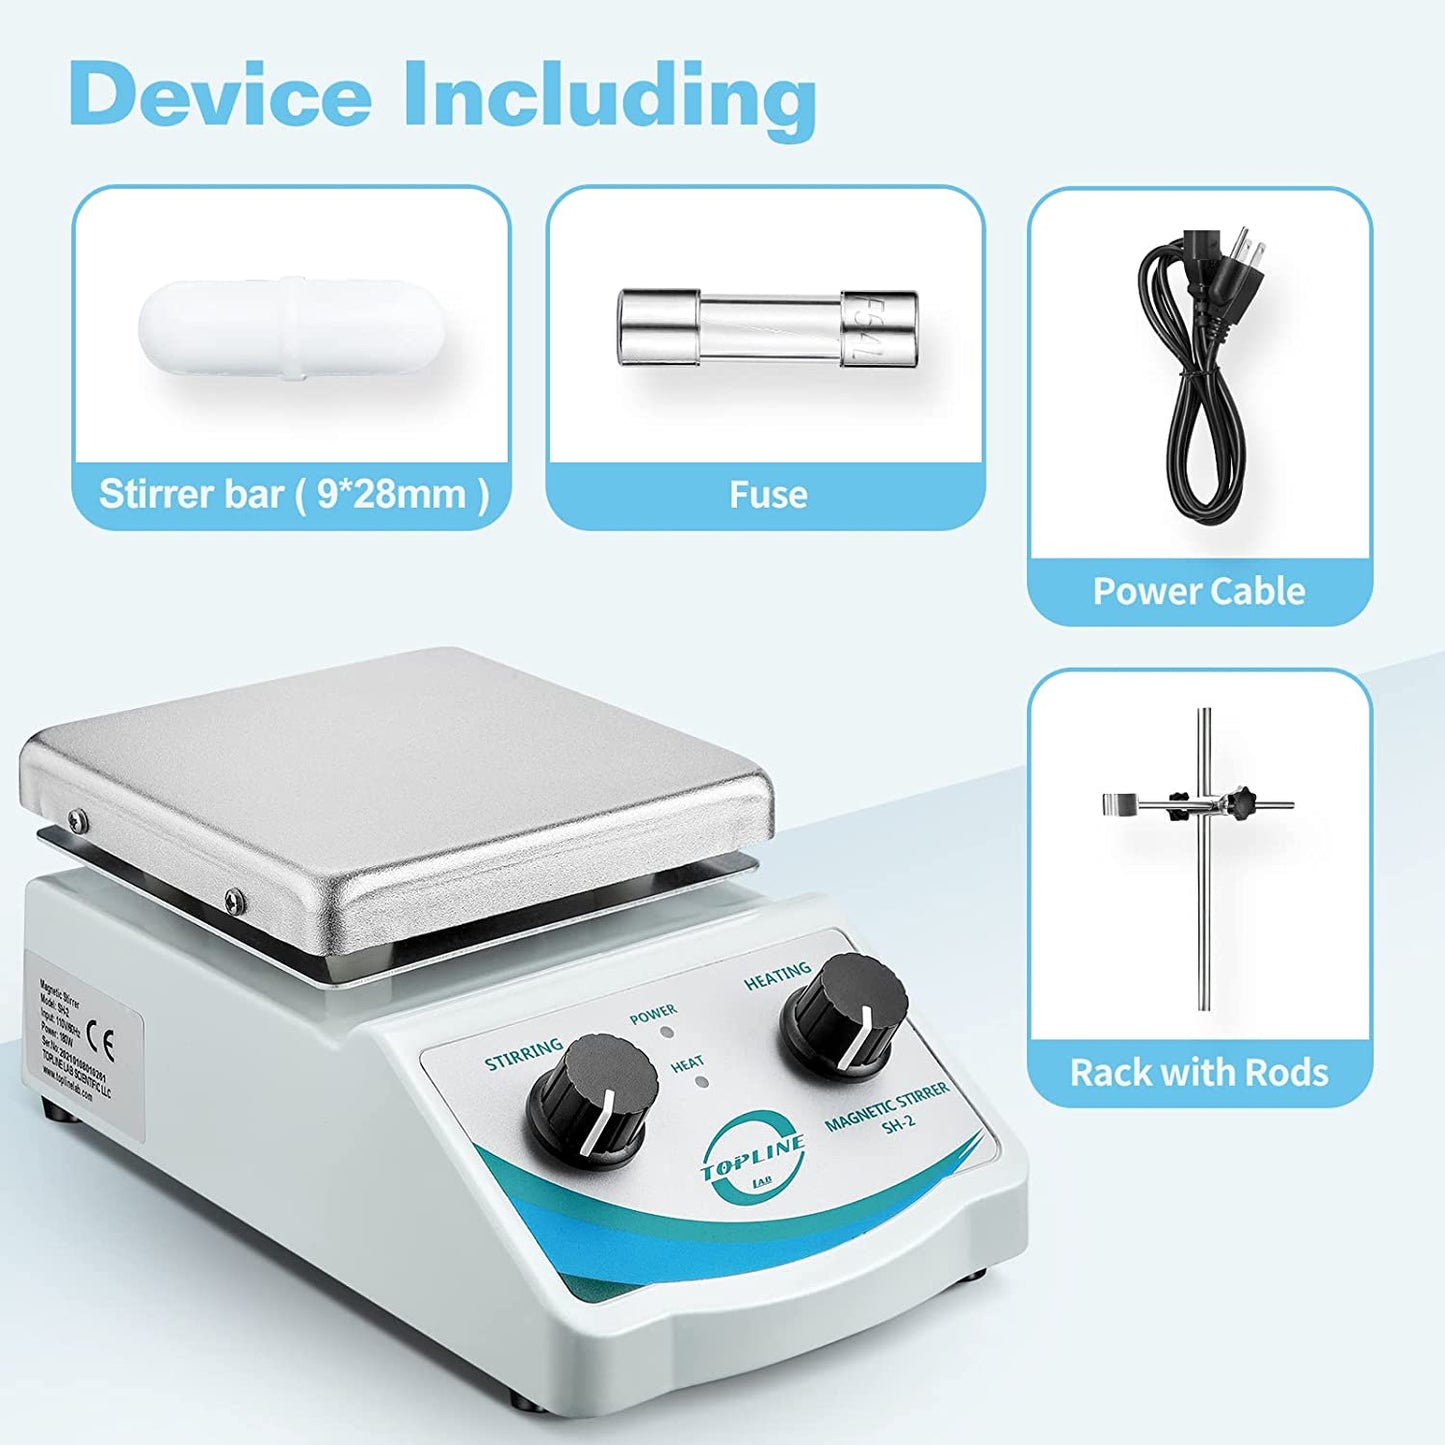 Hot Plate Magnetic Stirrer Mixer Dual Control with 1 inch Stir Bar